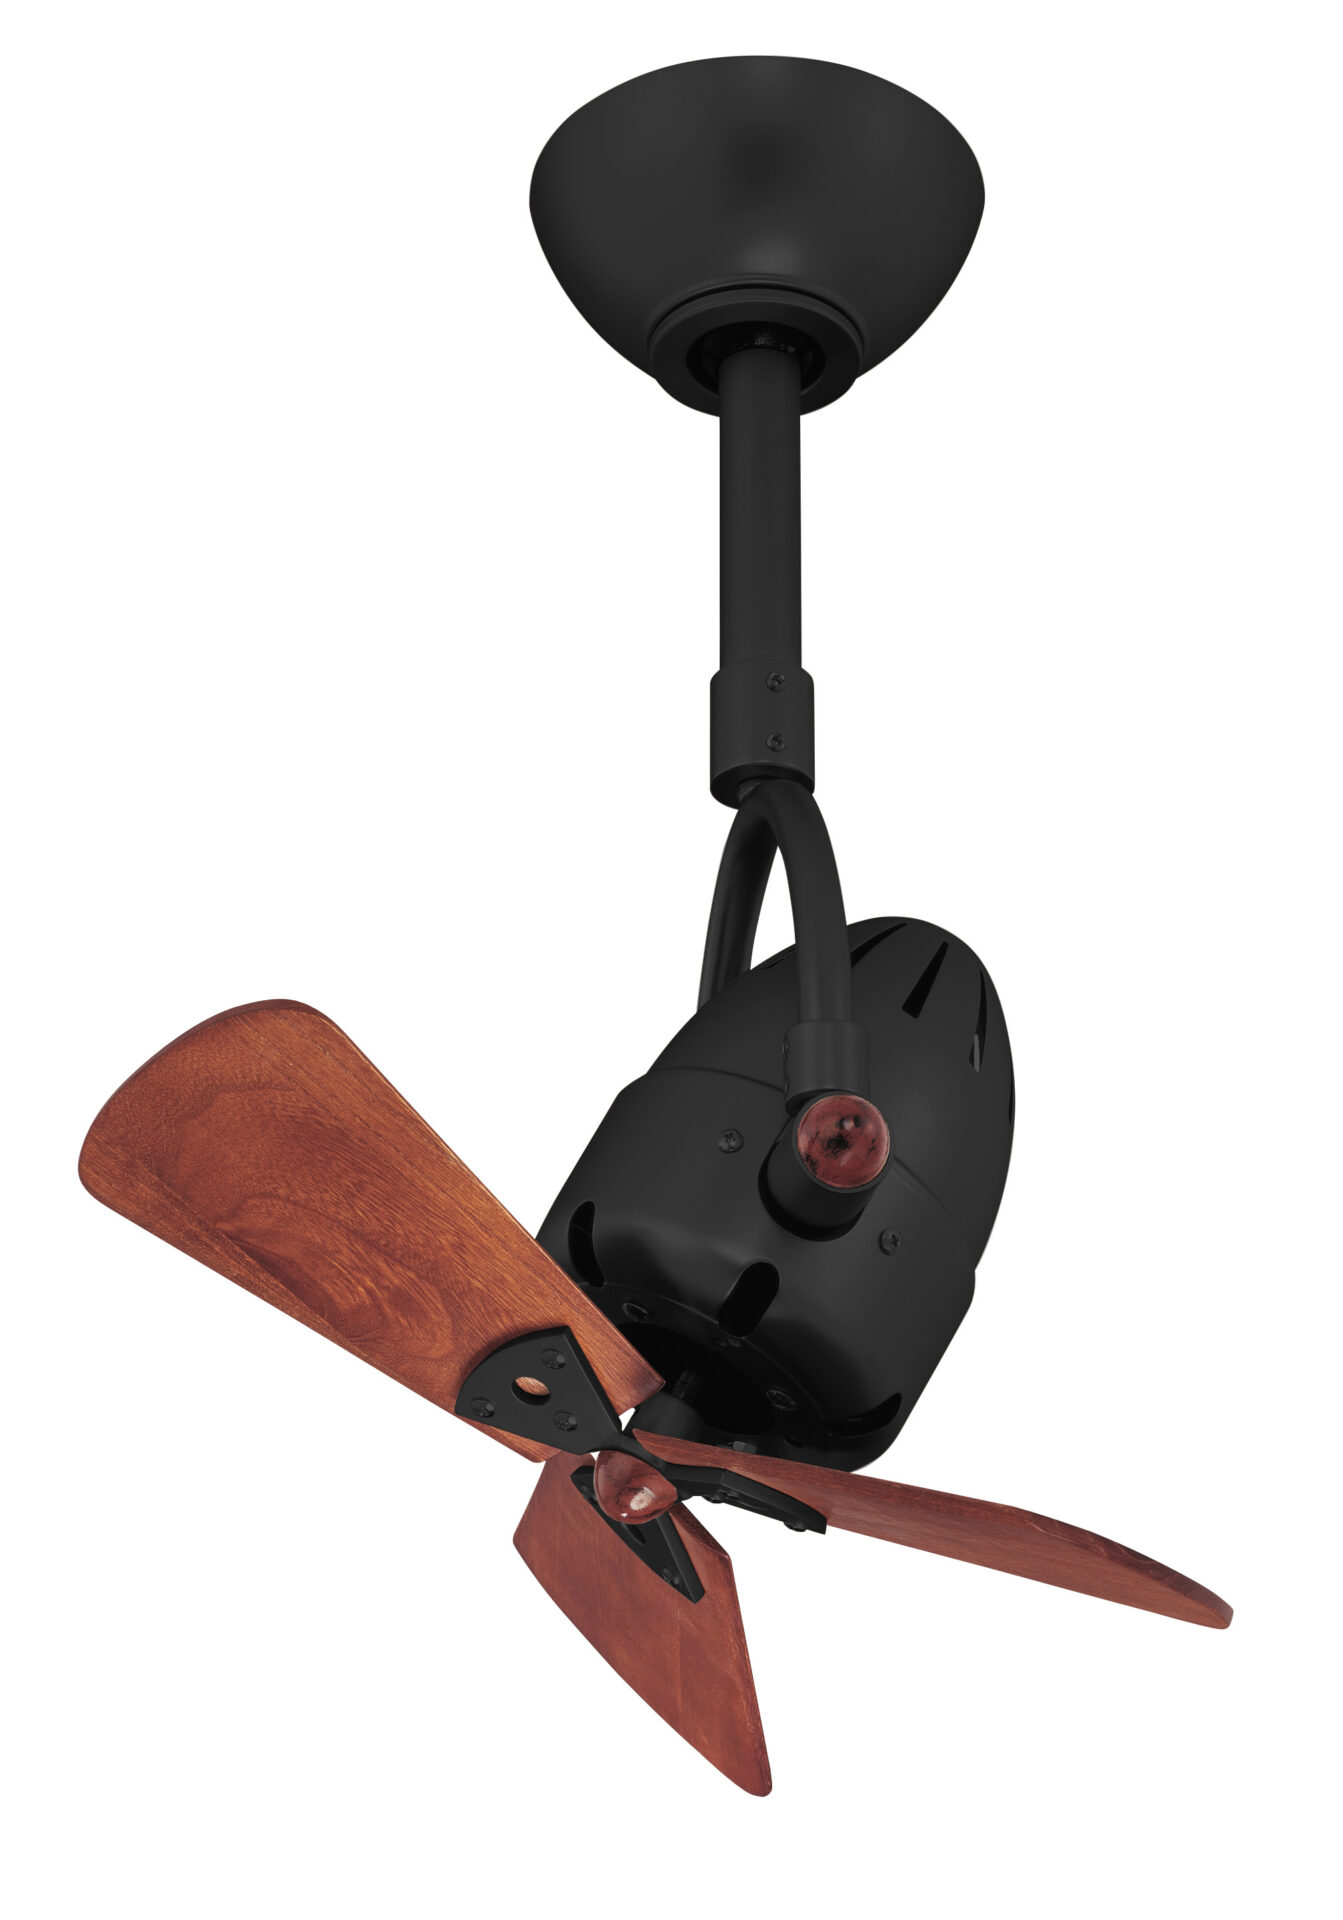 Diane ceiling fan in Matte Black with Mahogany wood blades manufactured by Matthews Fan Company.